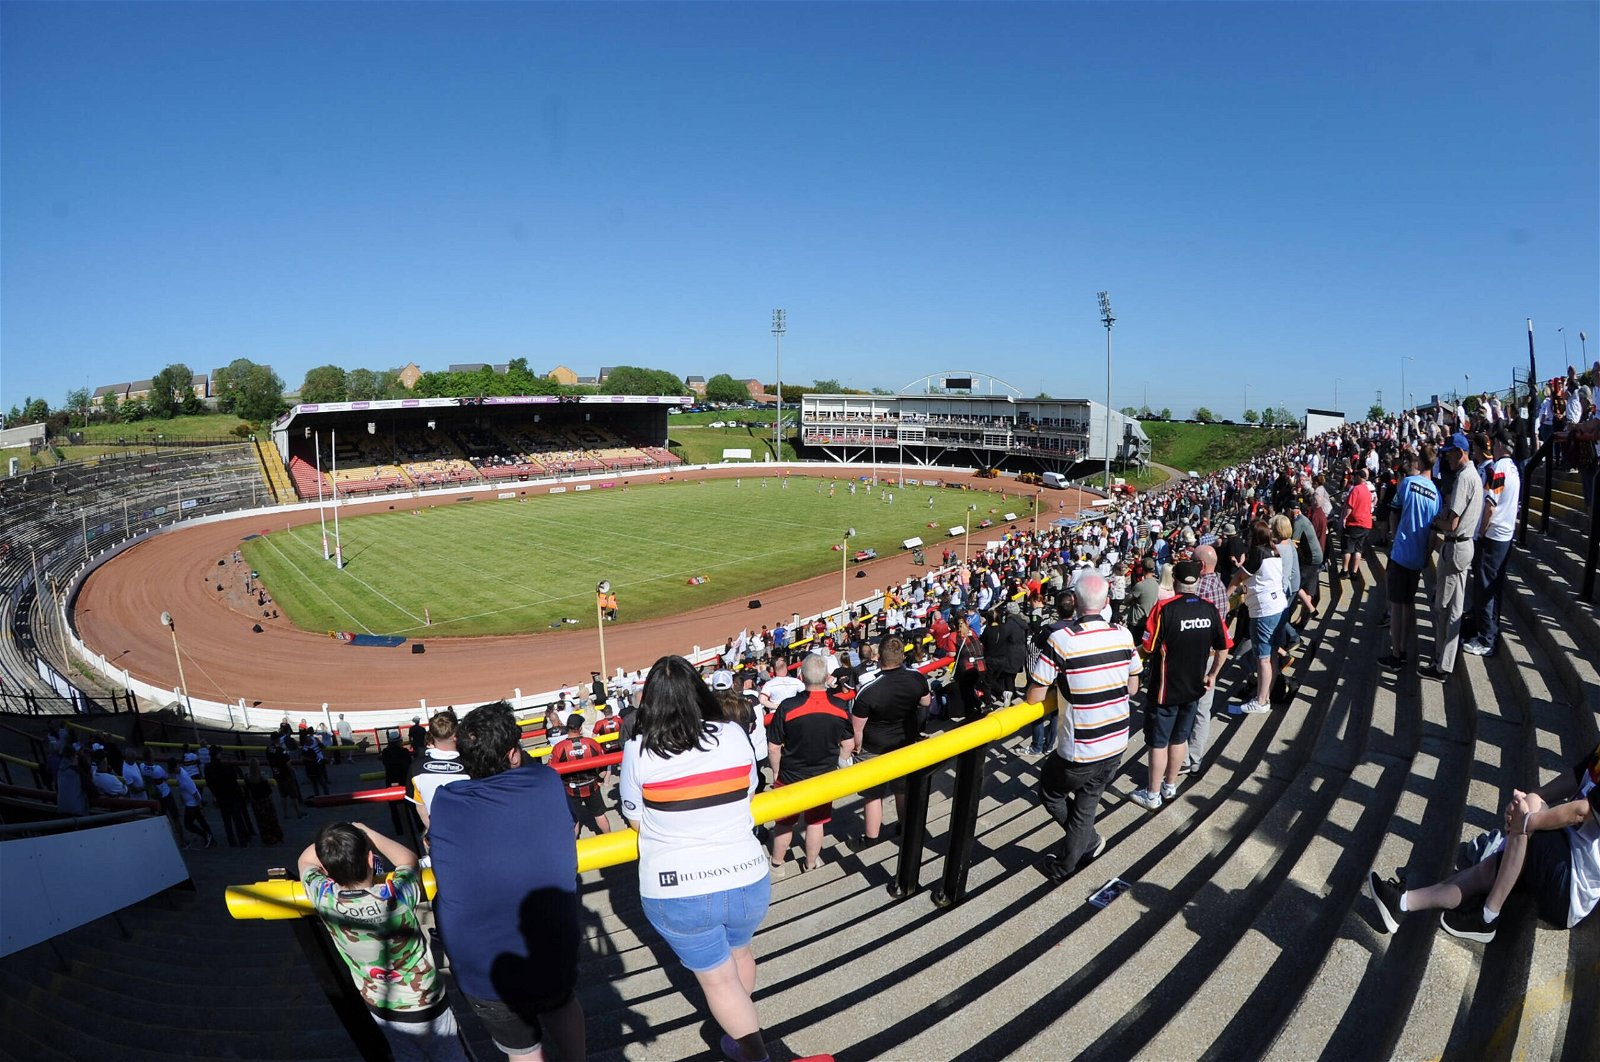 Bradford Bulls will welcome Widnes Vikings to Odsal in one of the broadcast games from Round Four.